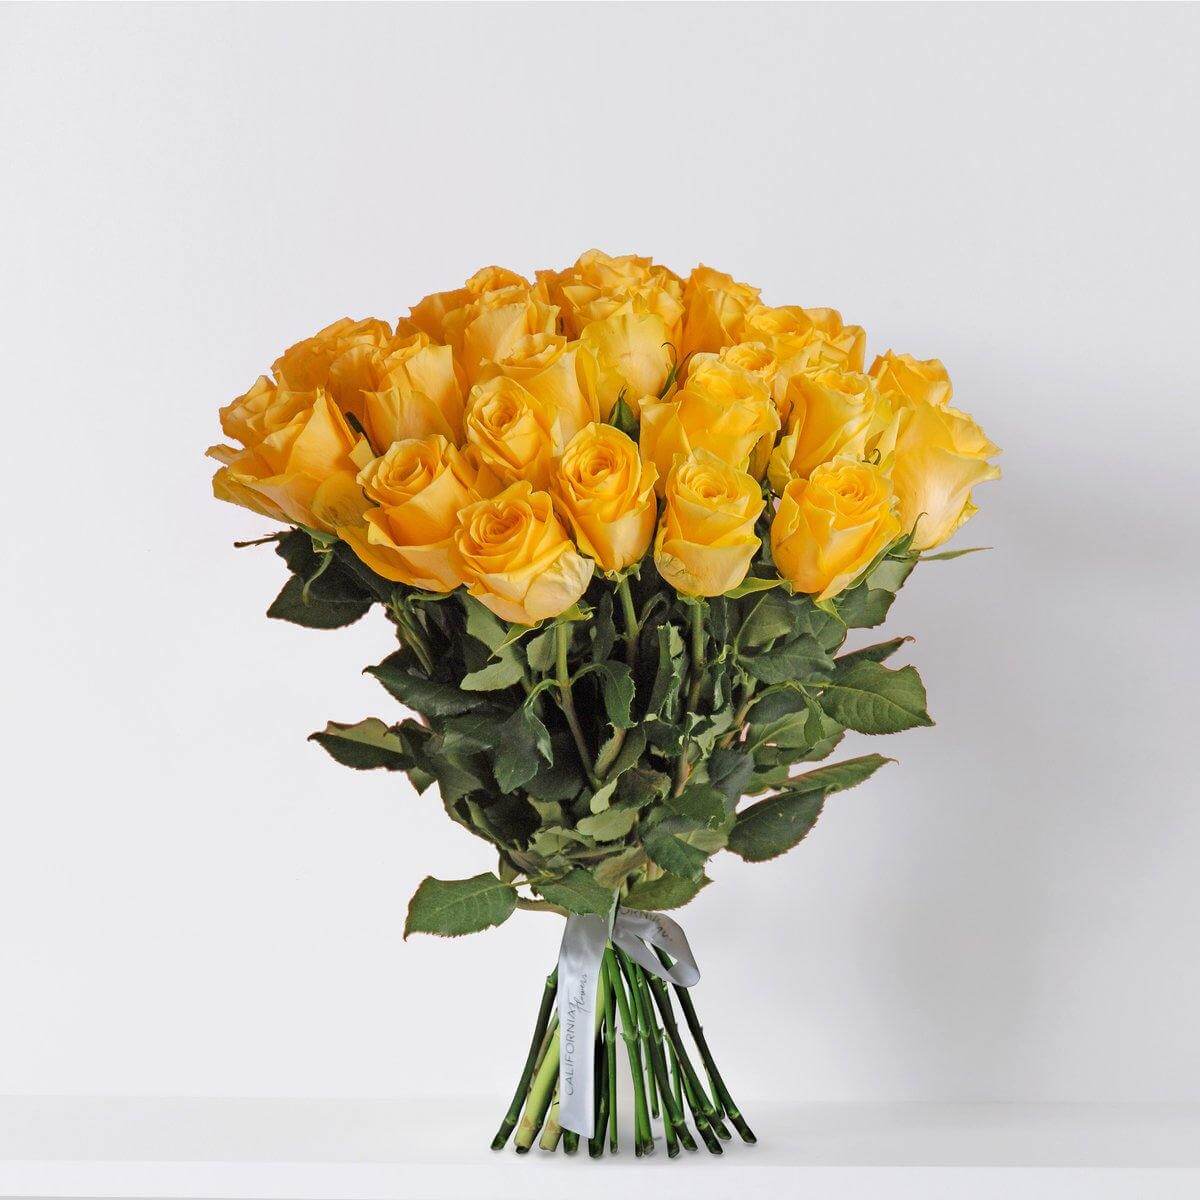 Bouquet of 27 yellow roses